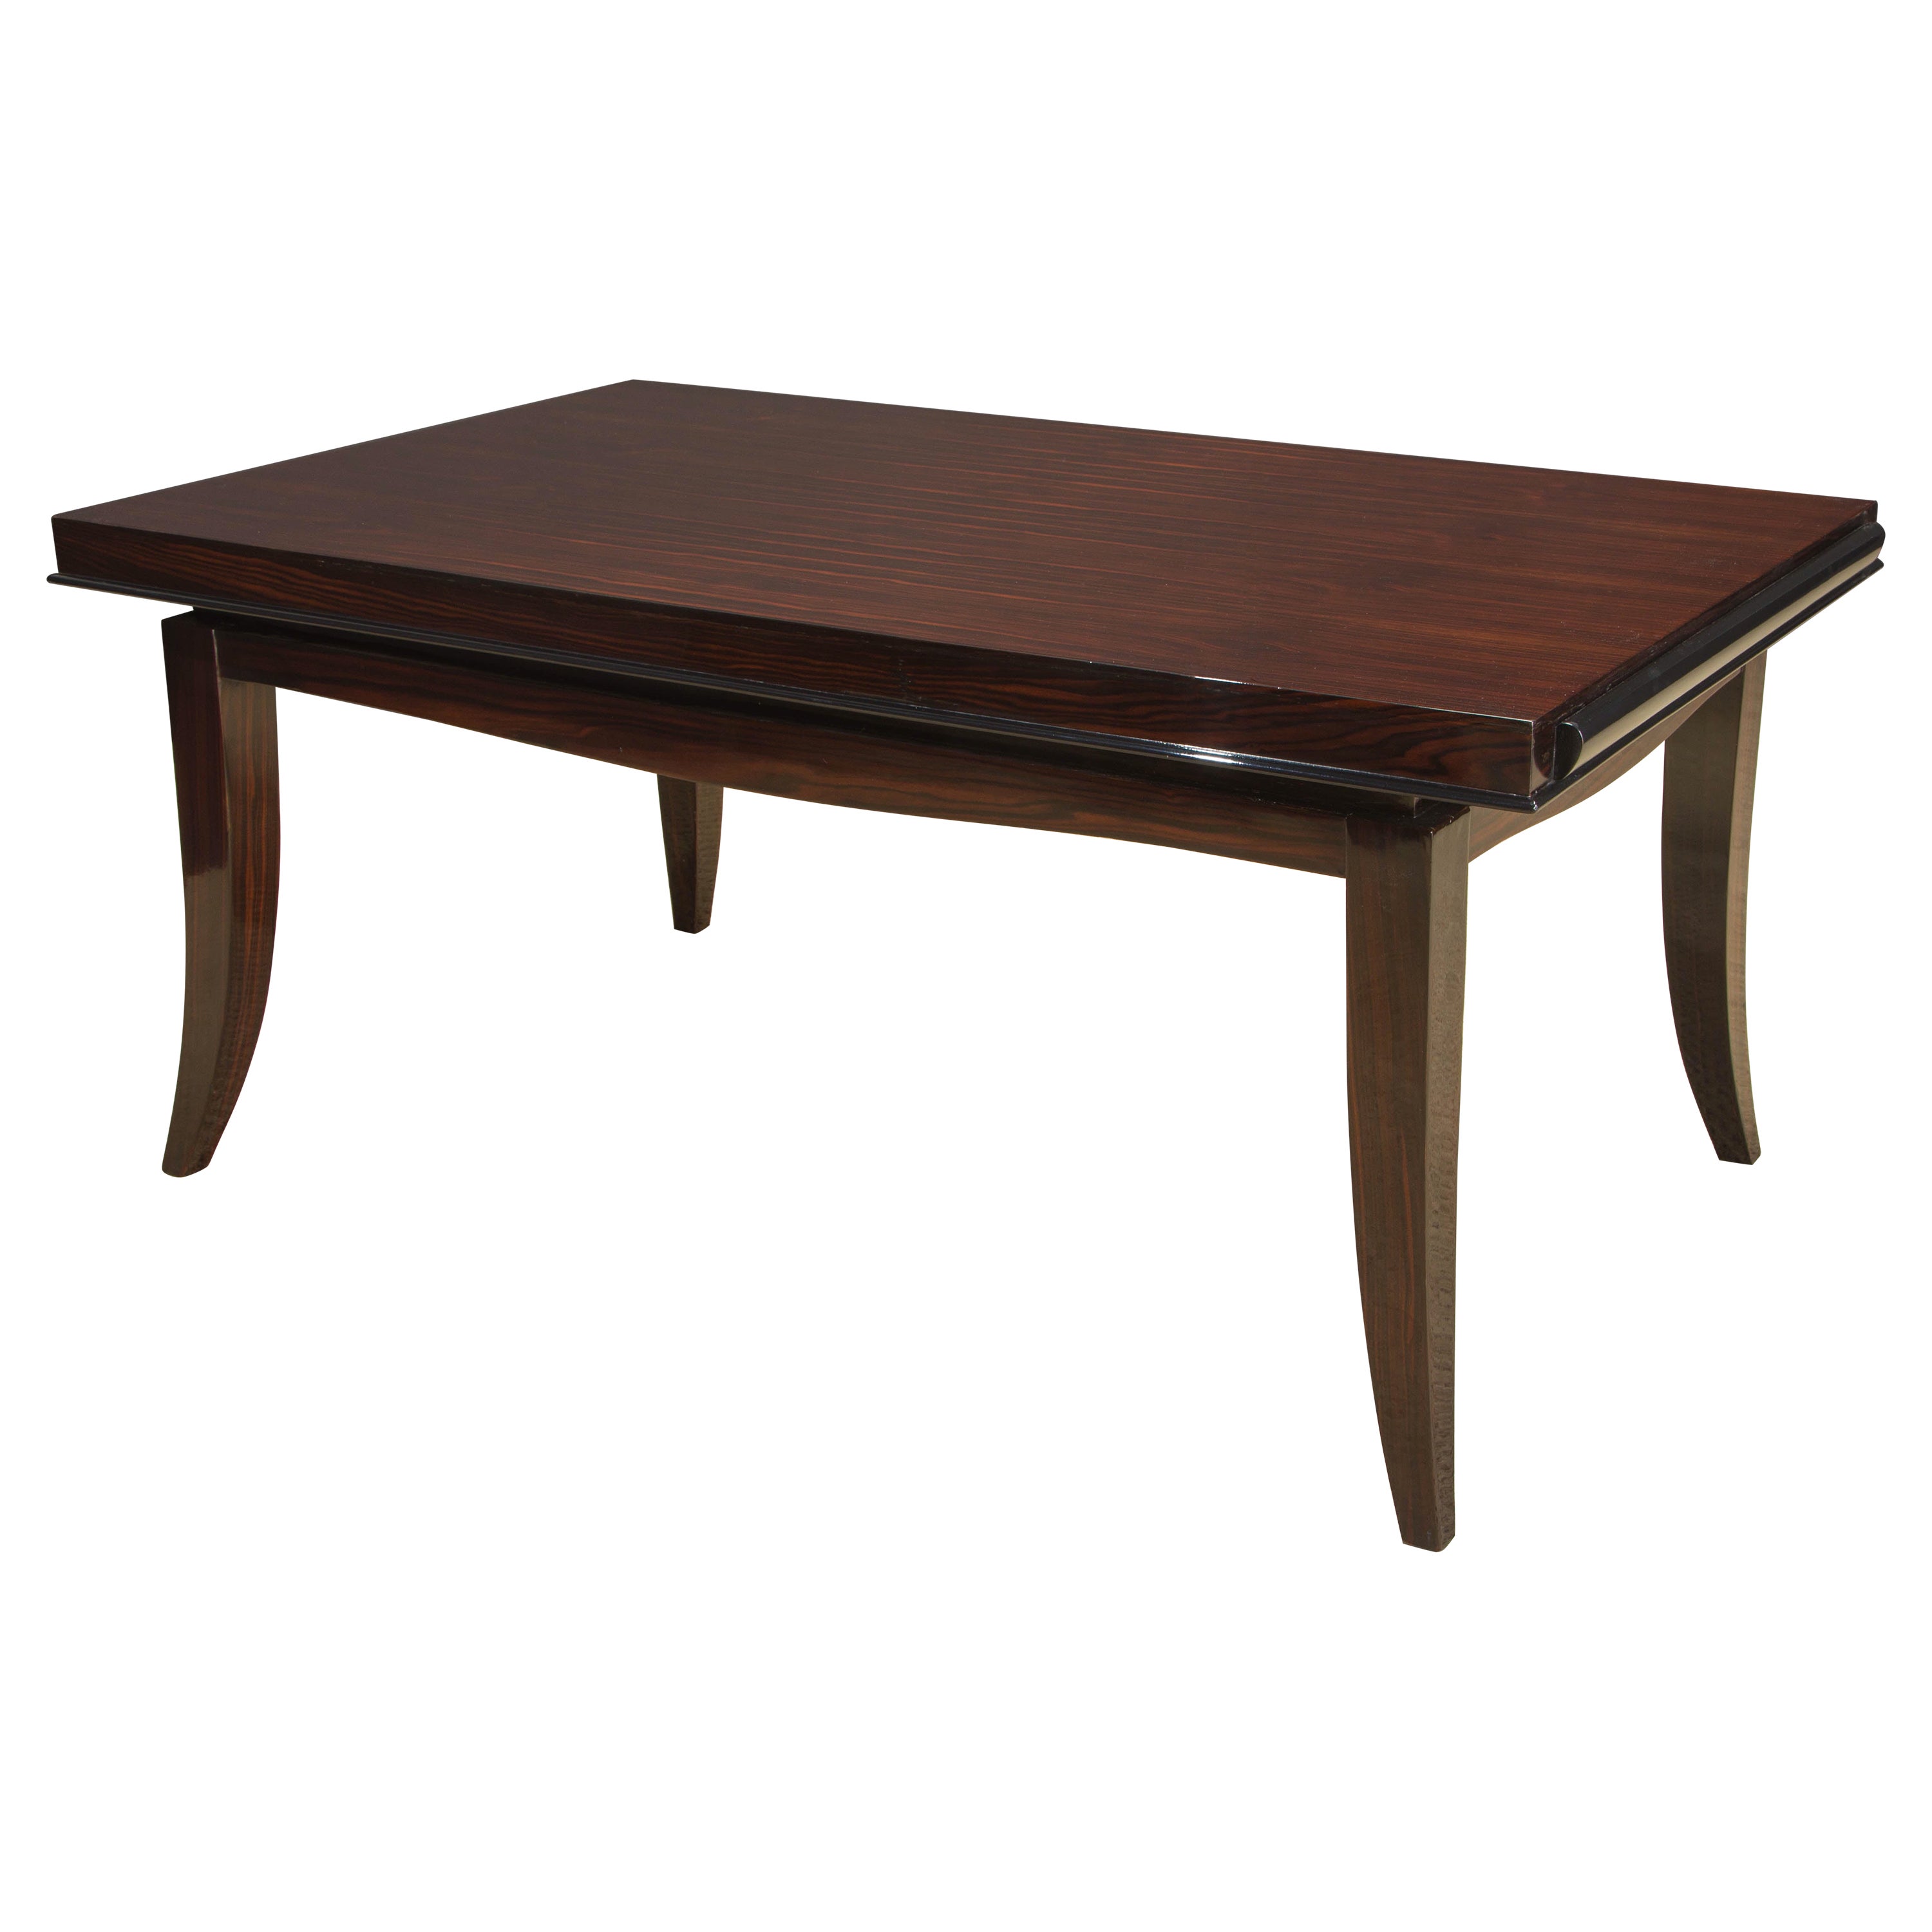 Macassar Ebony French Art Deco Dining Table in the style of Dominique, c. 1940 For Sale